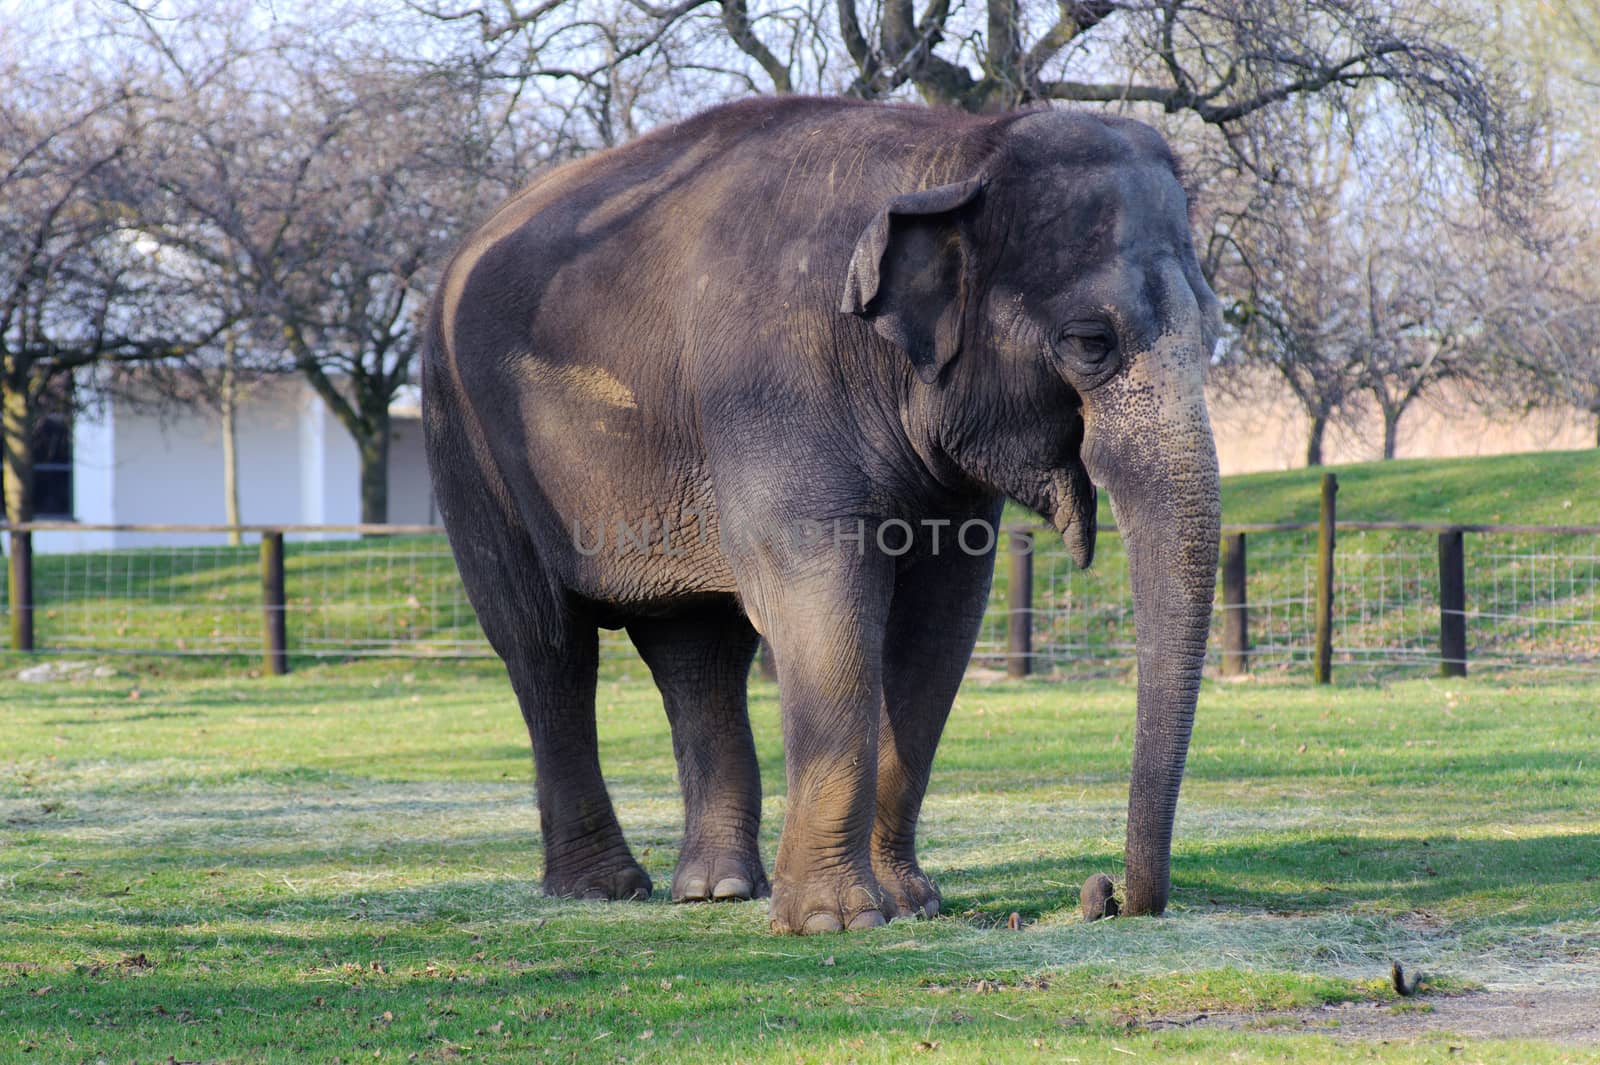 Elephant on grass in the sun